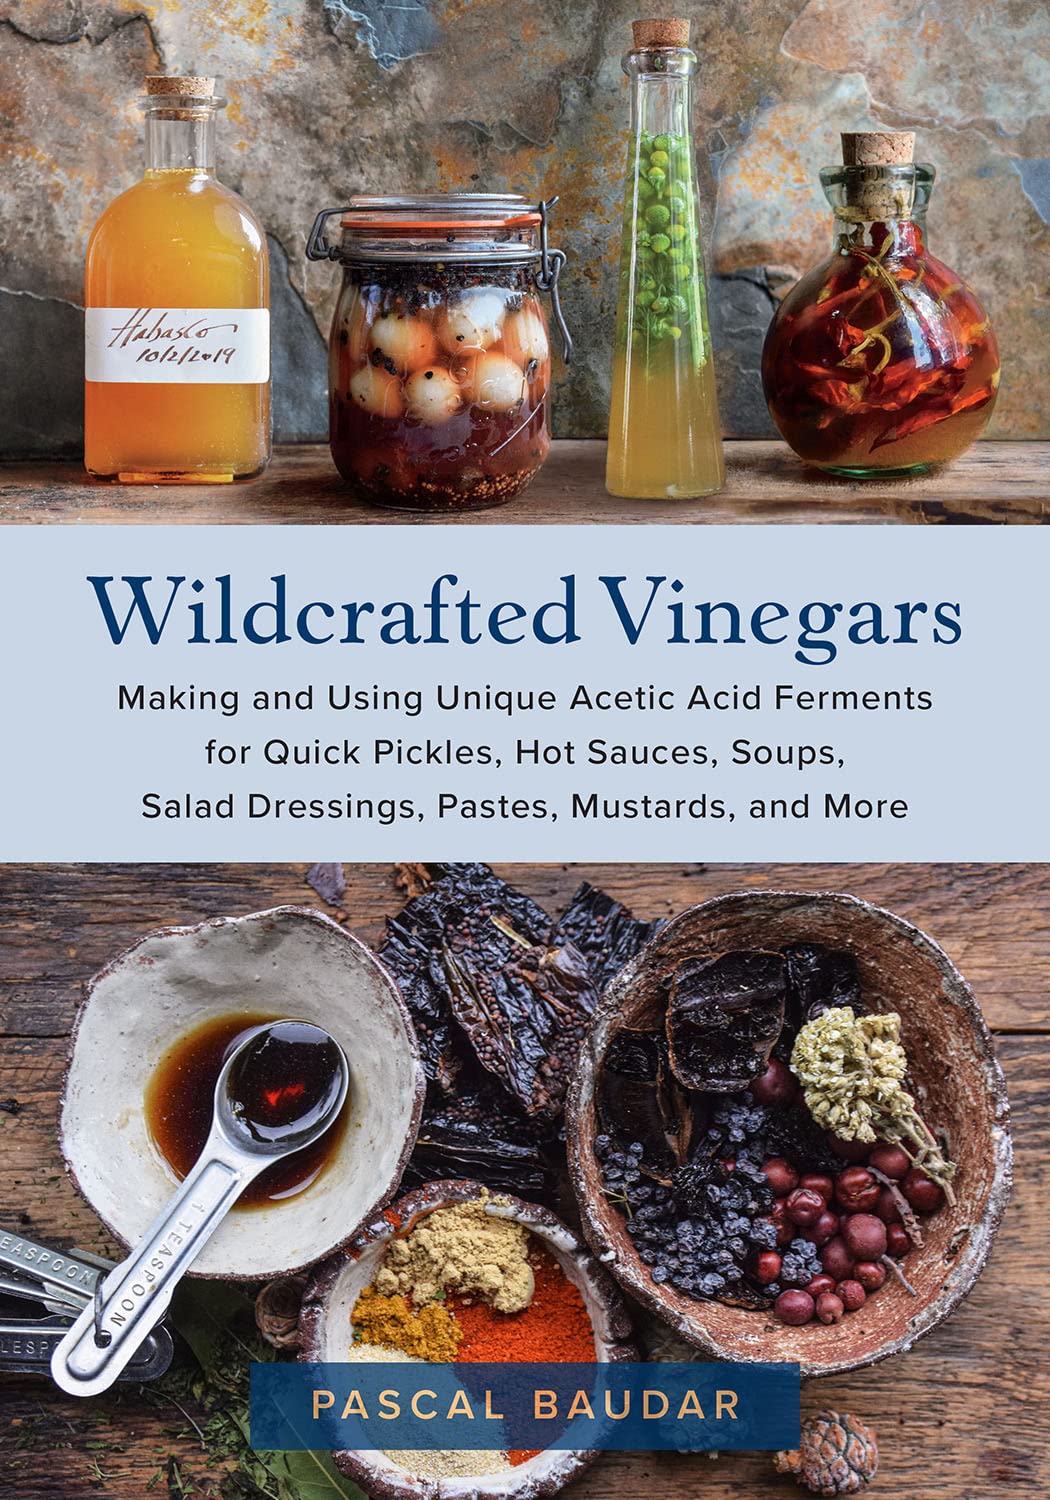 Wildcrafted Vinegars: Making and Using Unique Acetic Acid Ferments for Quick Pickles, Hot Sauces, Soups, Salad Dressings, Pastes, Mustards, and More (Pascal Baudar)